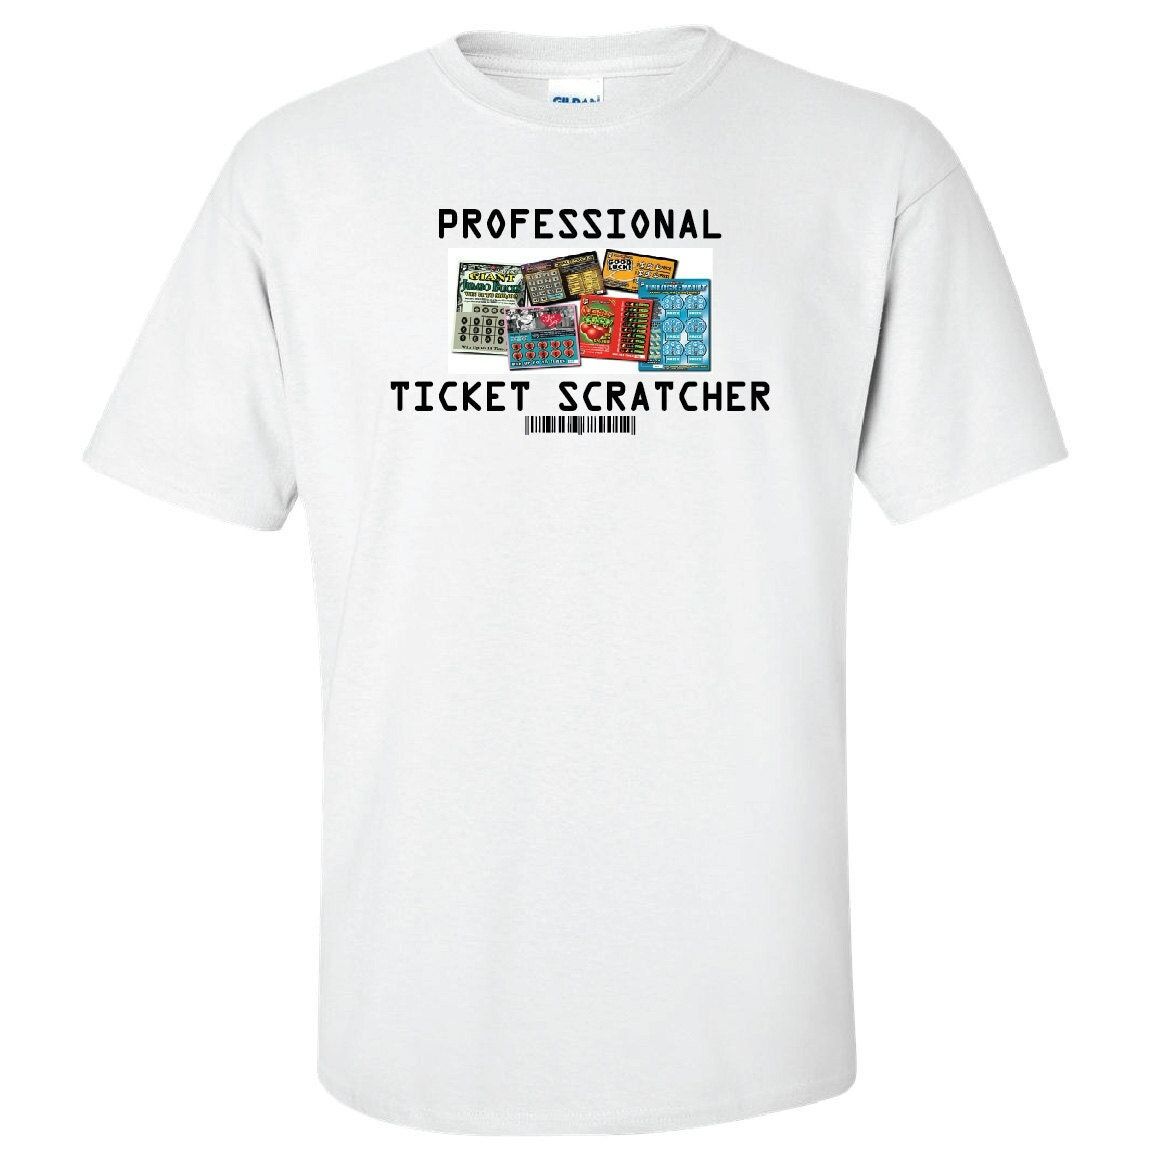 Professional Ticket Scratcher Funny Cool Lottery Ticket T-Shirt